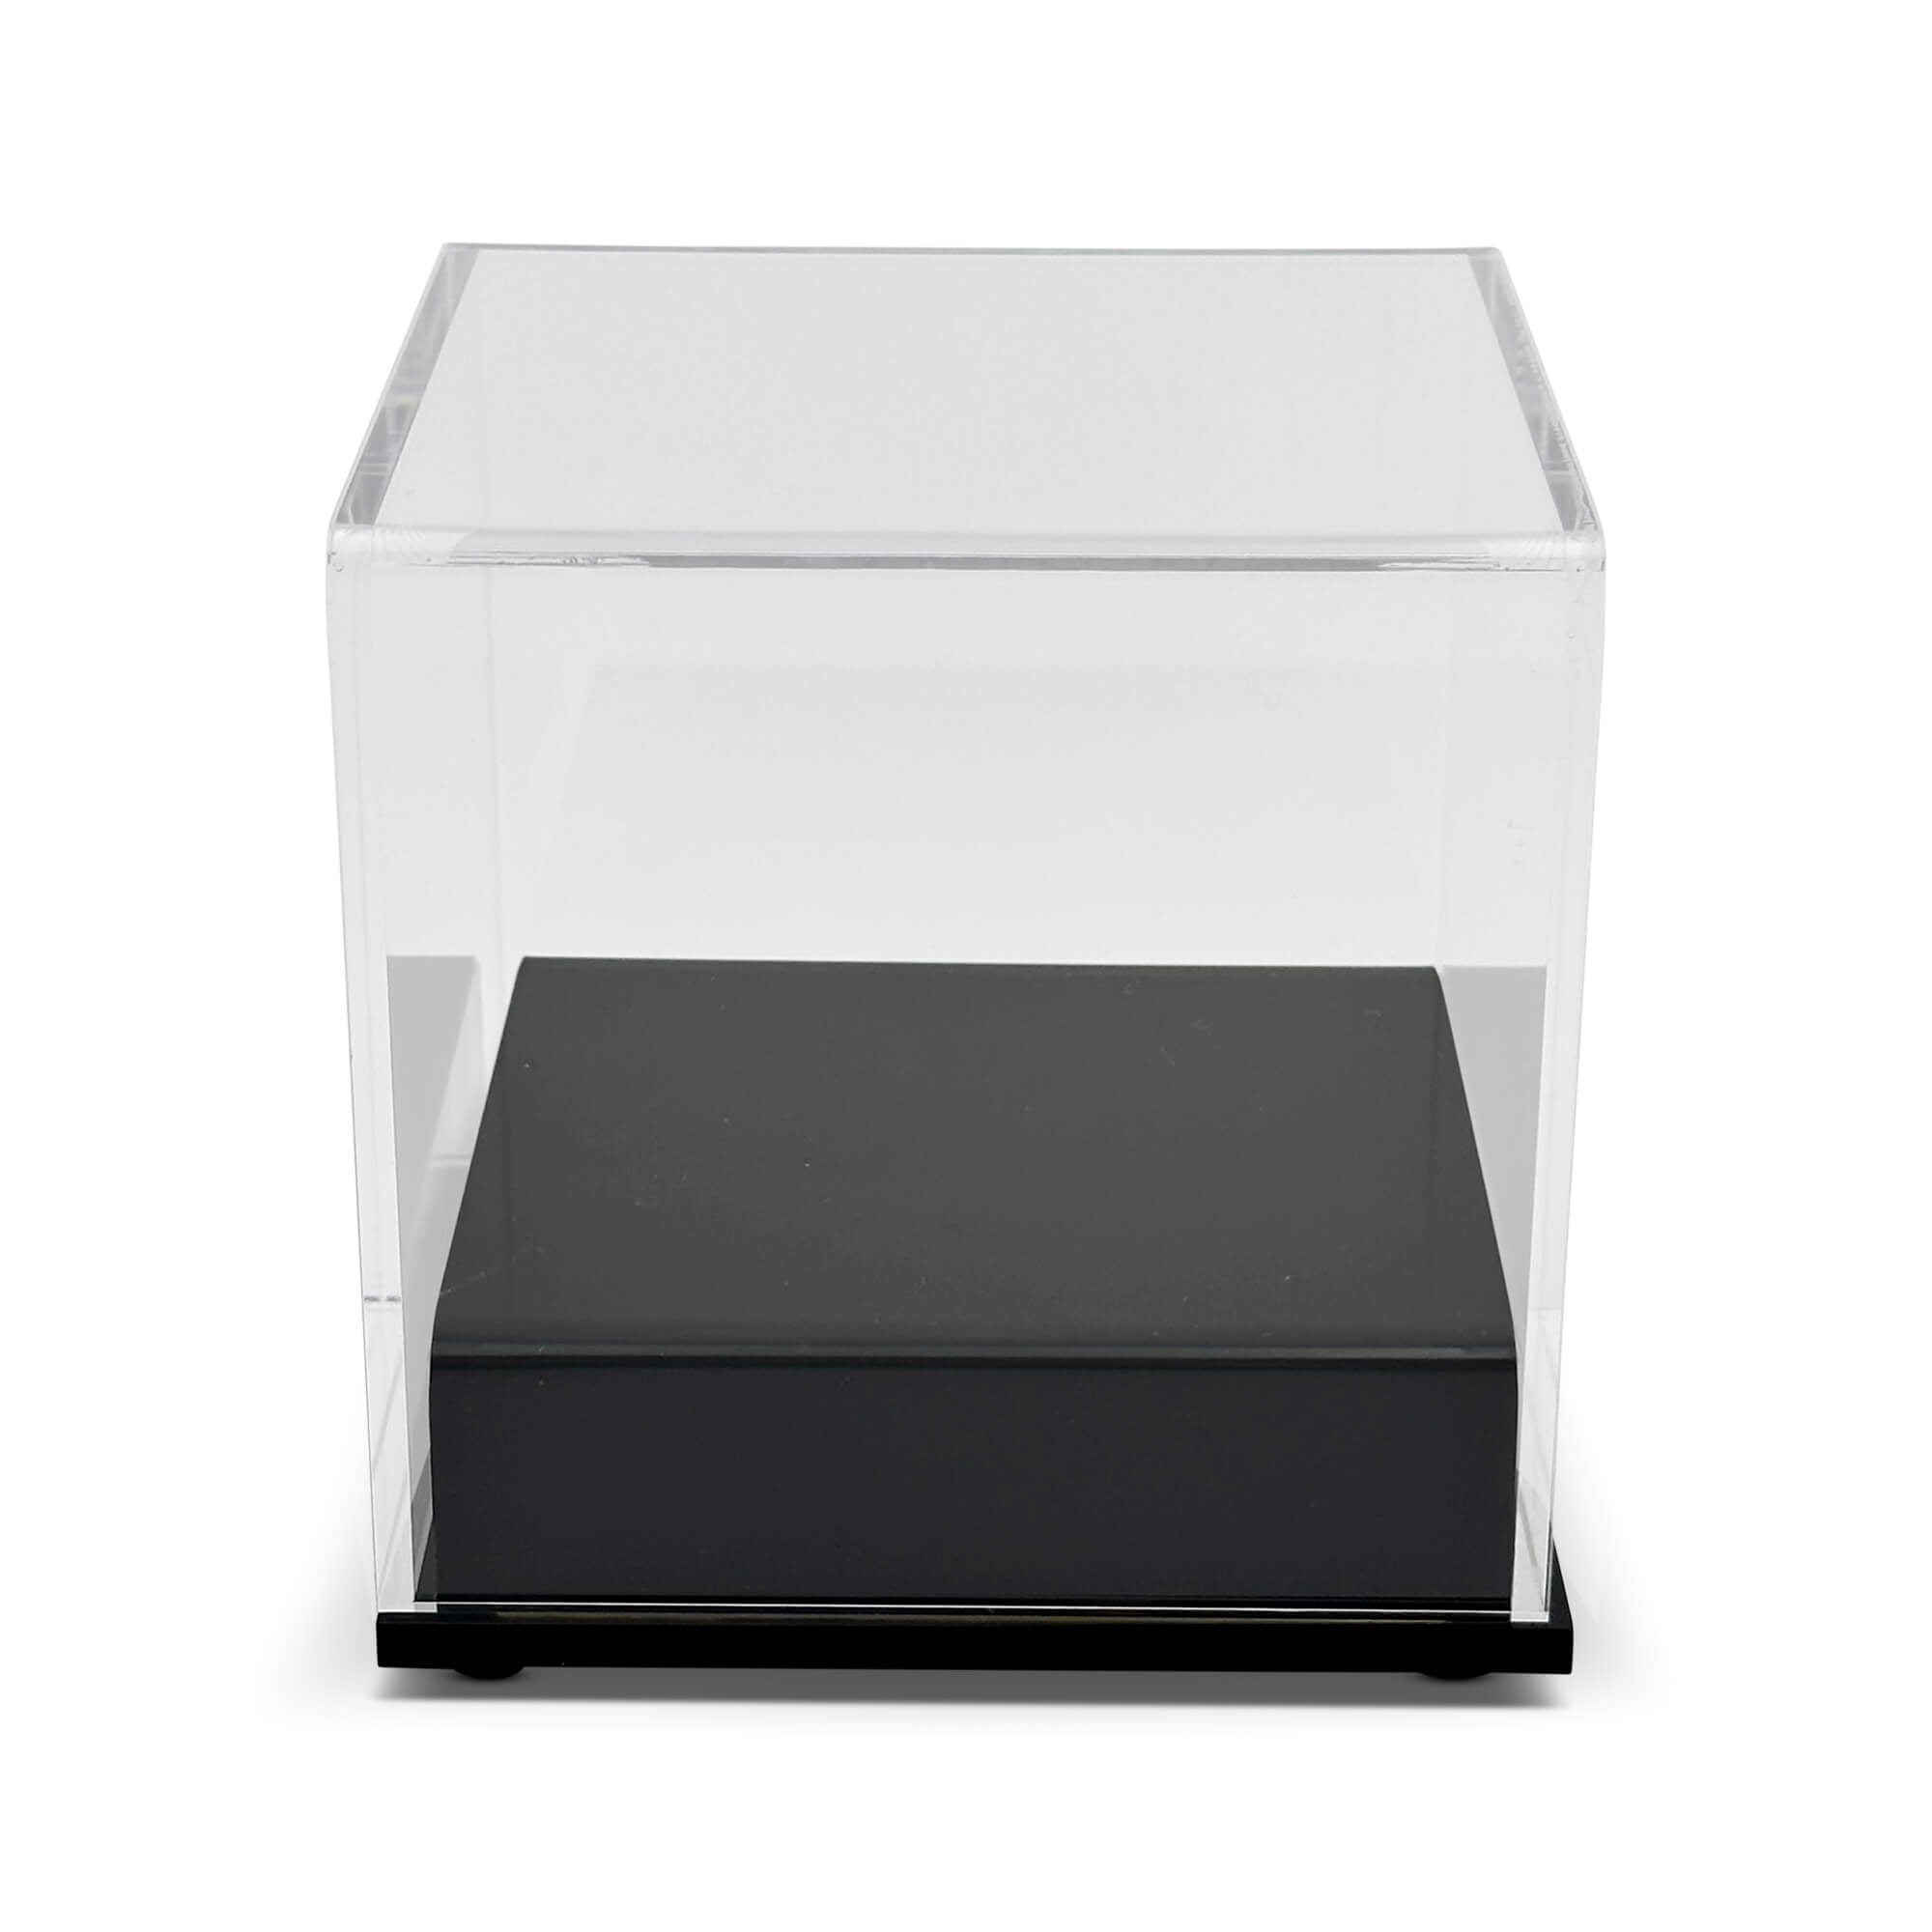 Acrylic Box Clear Display Case 4x4x4Inch Clear Display Box with Lid for  Valentine's Day Gifts, Weddings, Party Favors, Treats, Candies 